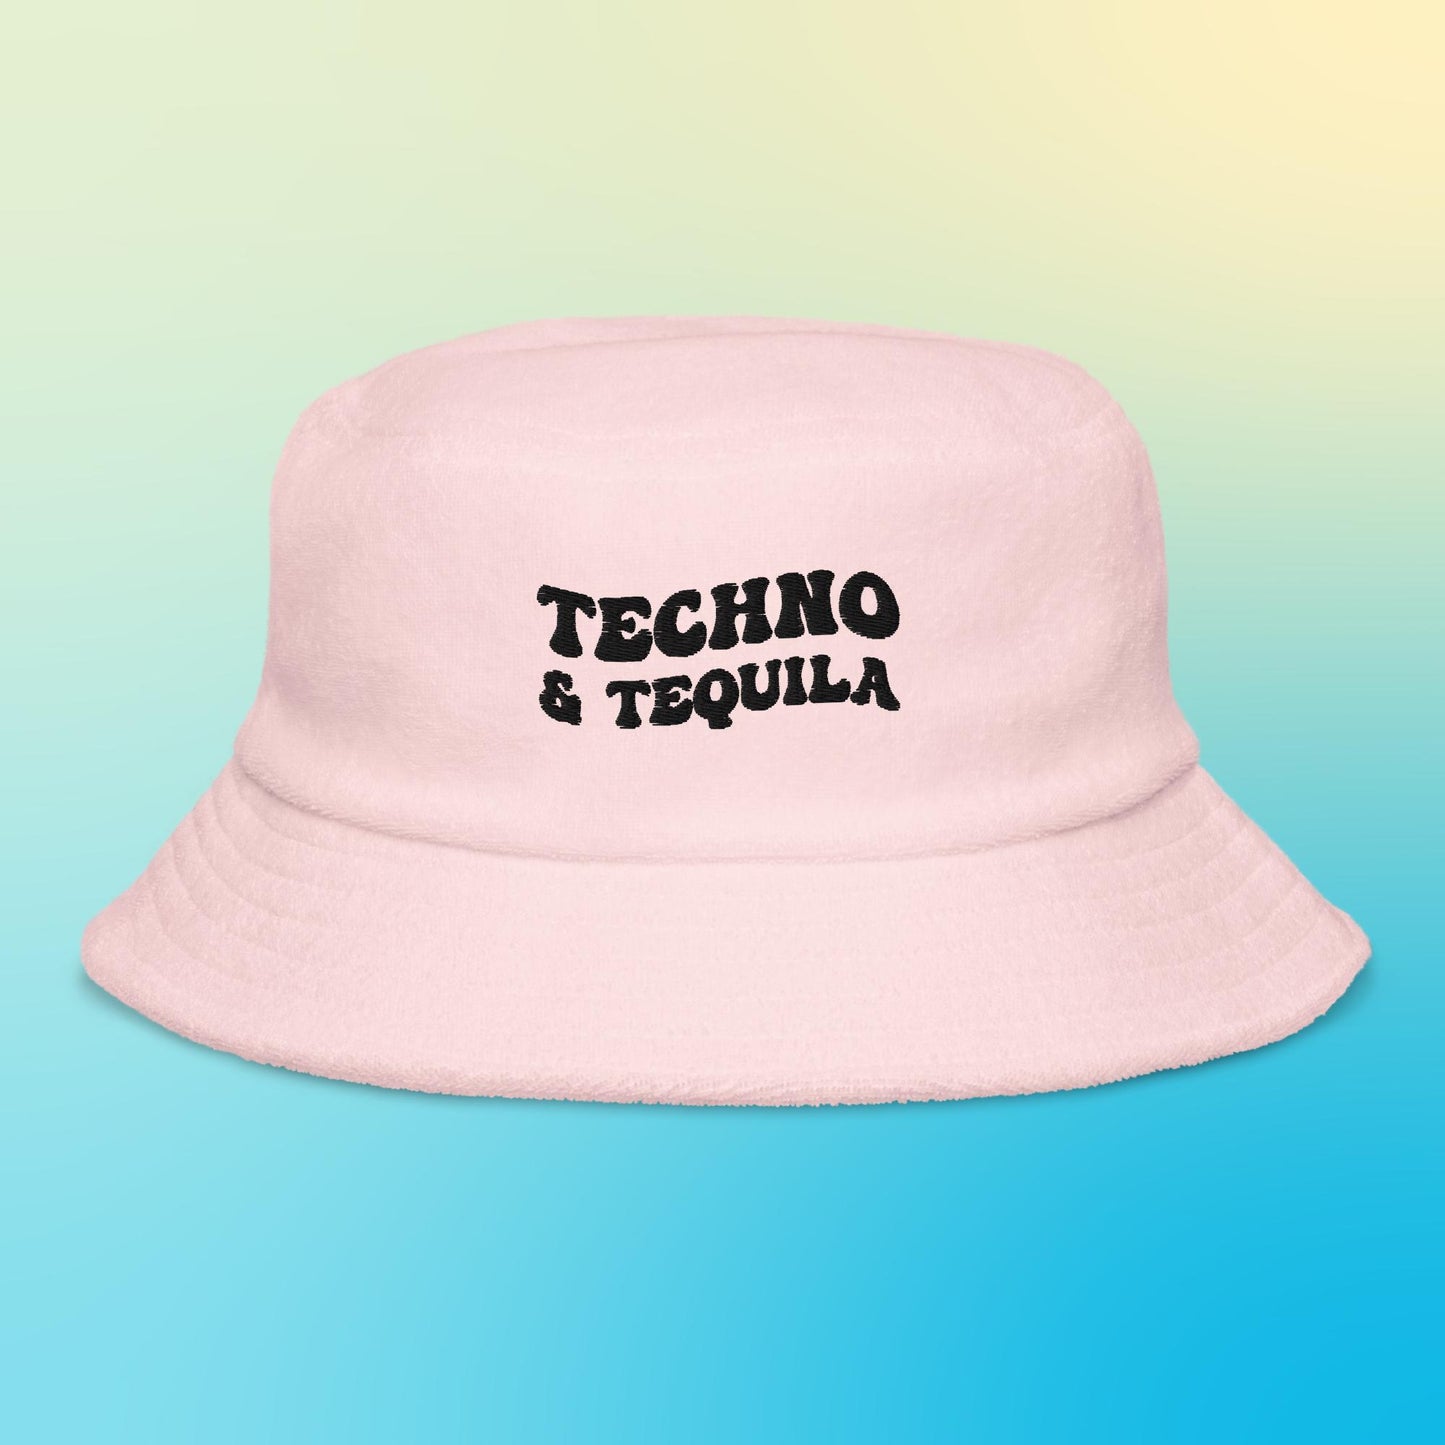 Techno & Tequila Terry Cloth Bucket Hat